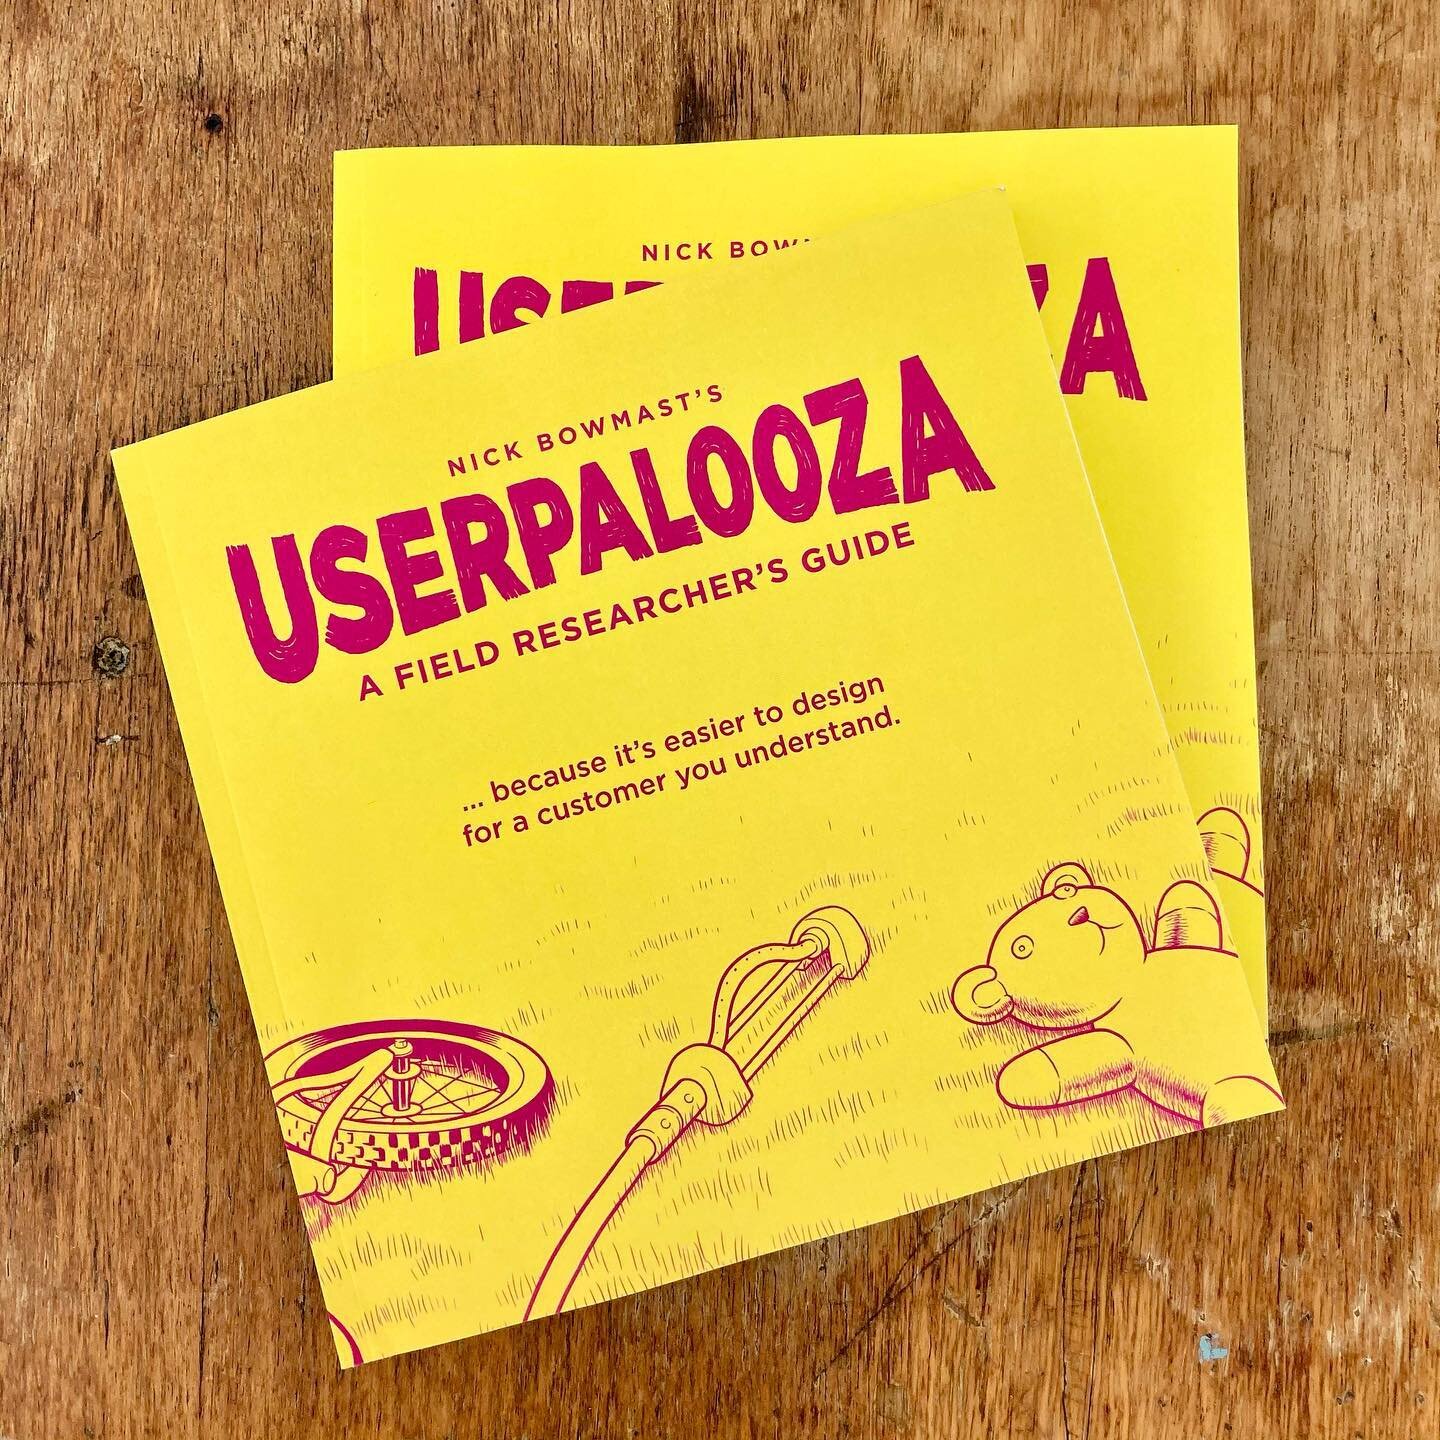 The new year brought us gifts - we can&rsquo;t wait to read this! Anyone here read it? 🤔#userpalooza #researchnerd #fieldwork #ethnography #researchbook #designbook